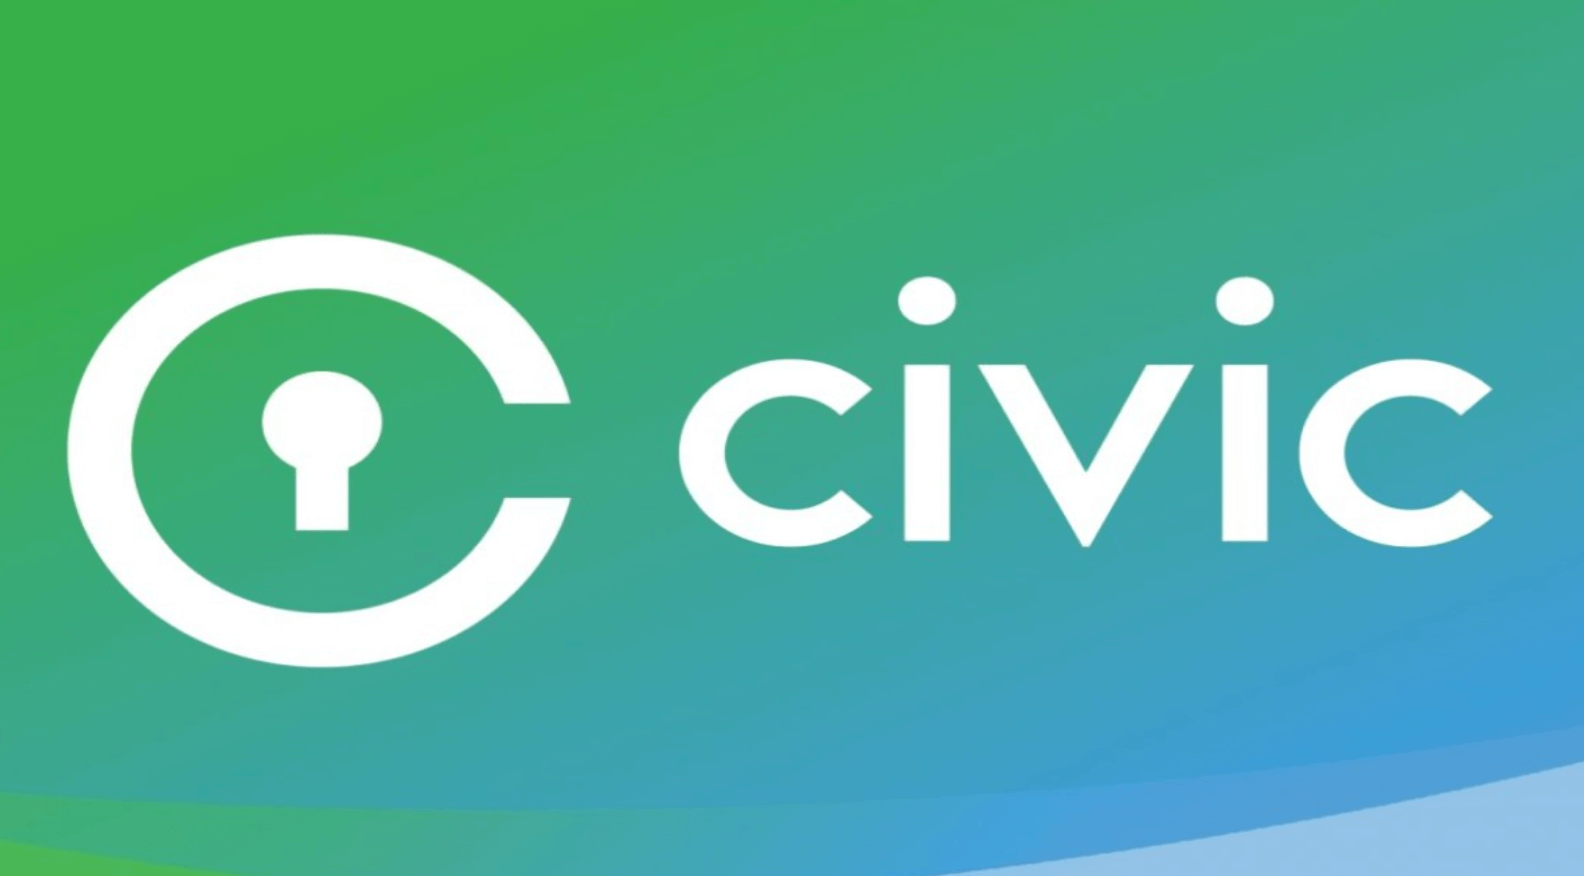 How to Buy Civic Coin?